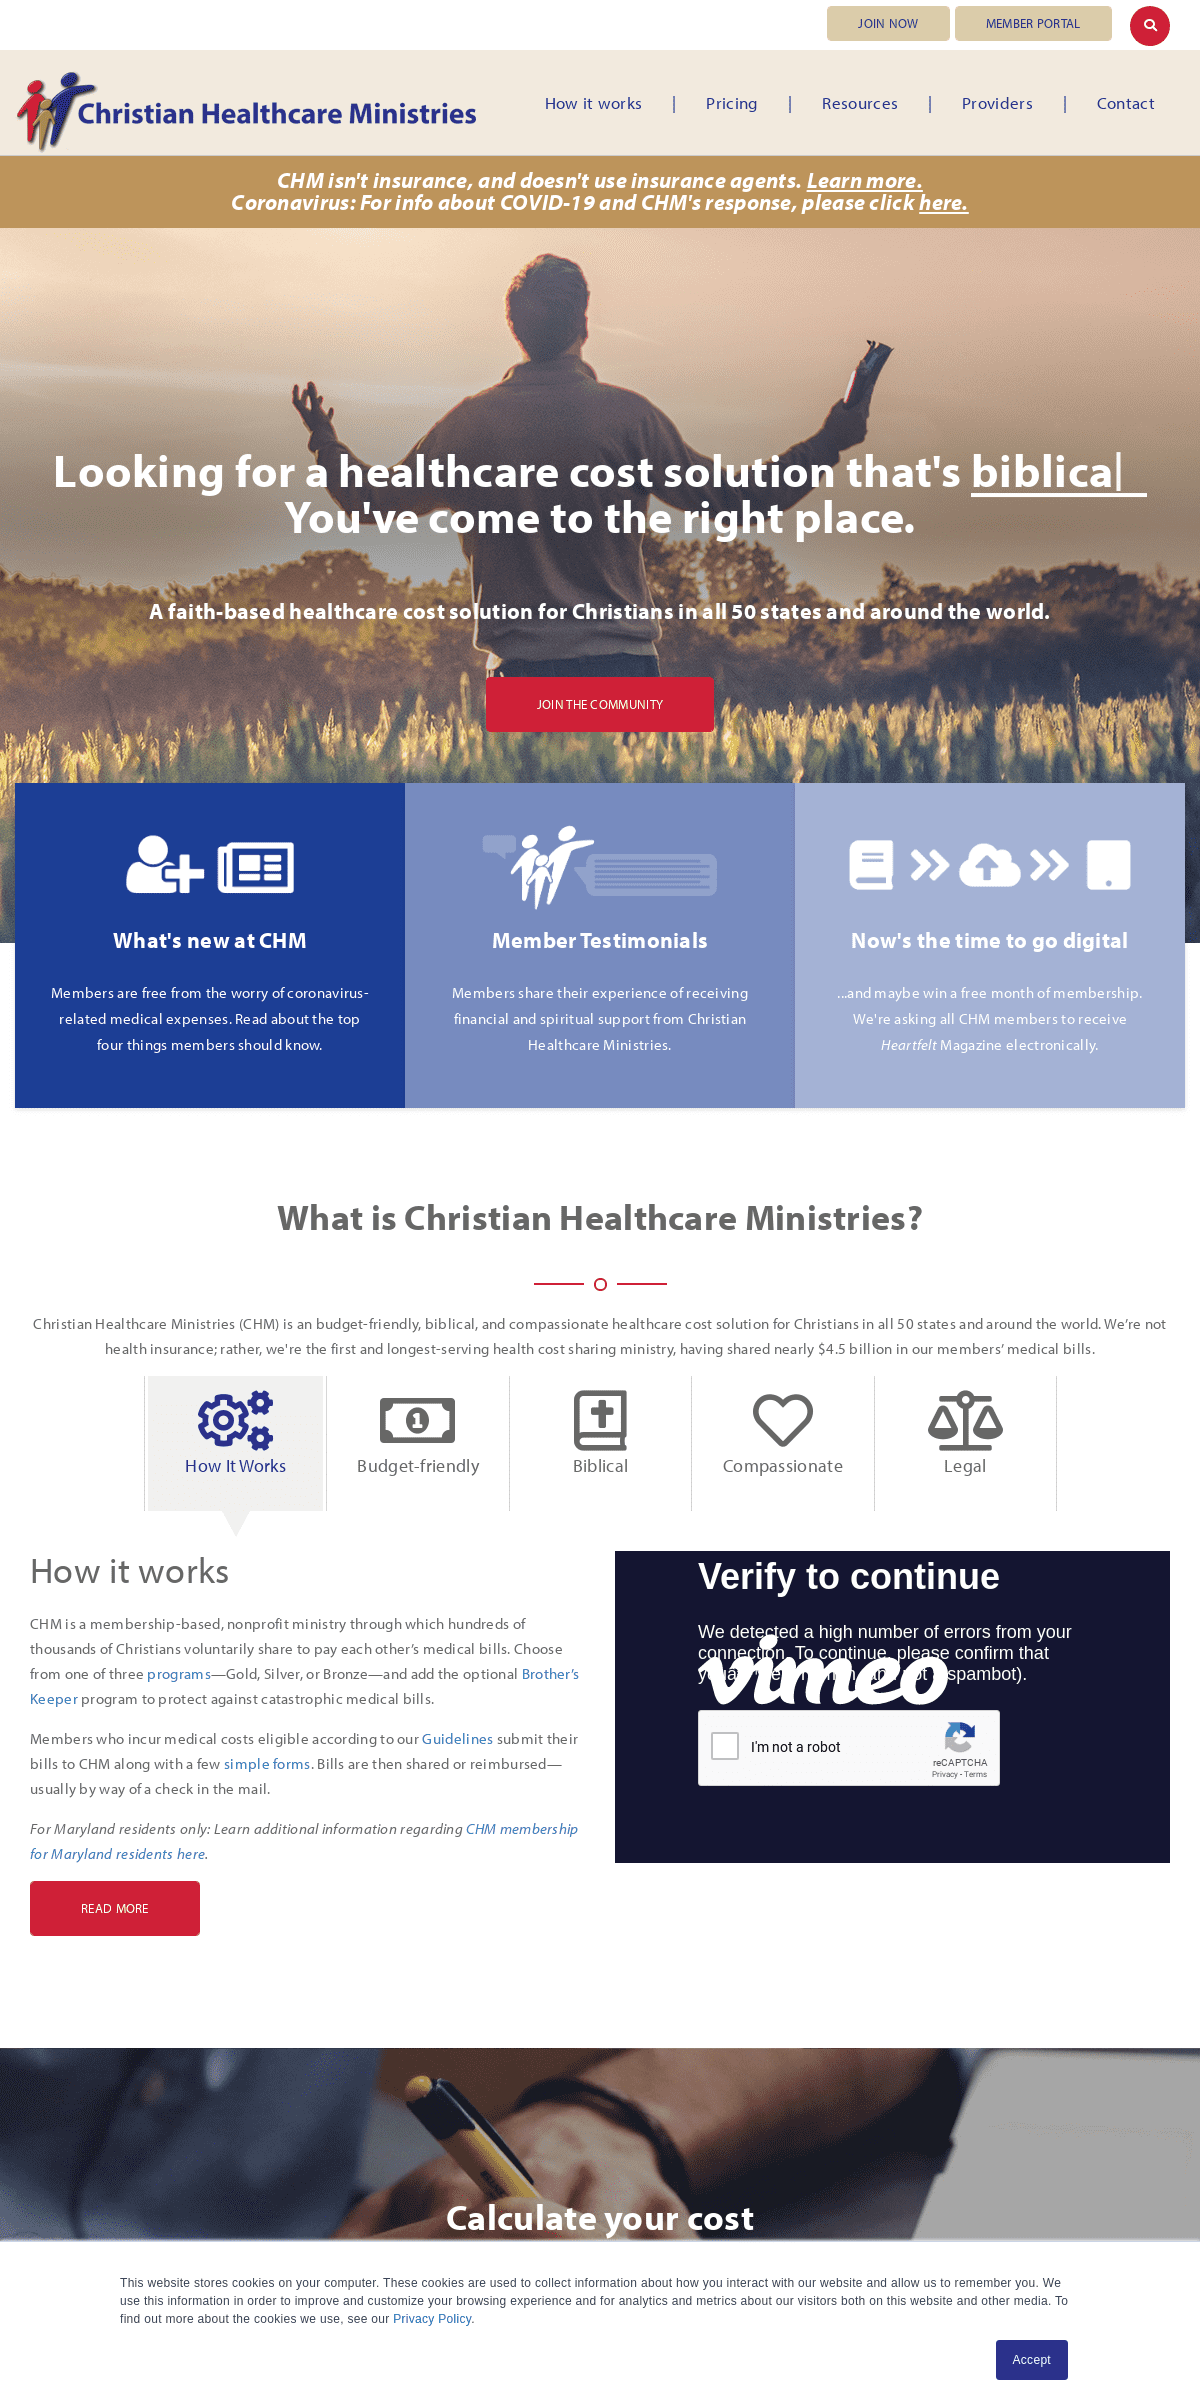 A complete backup of chministries.org